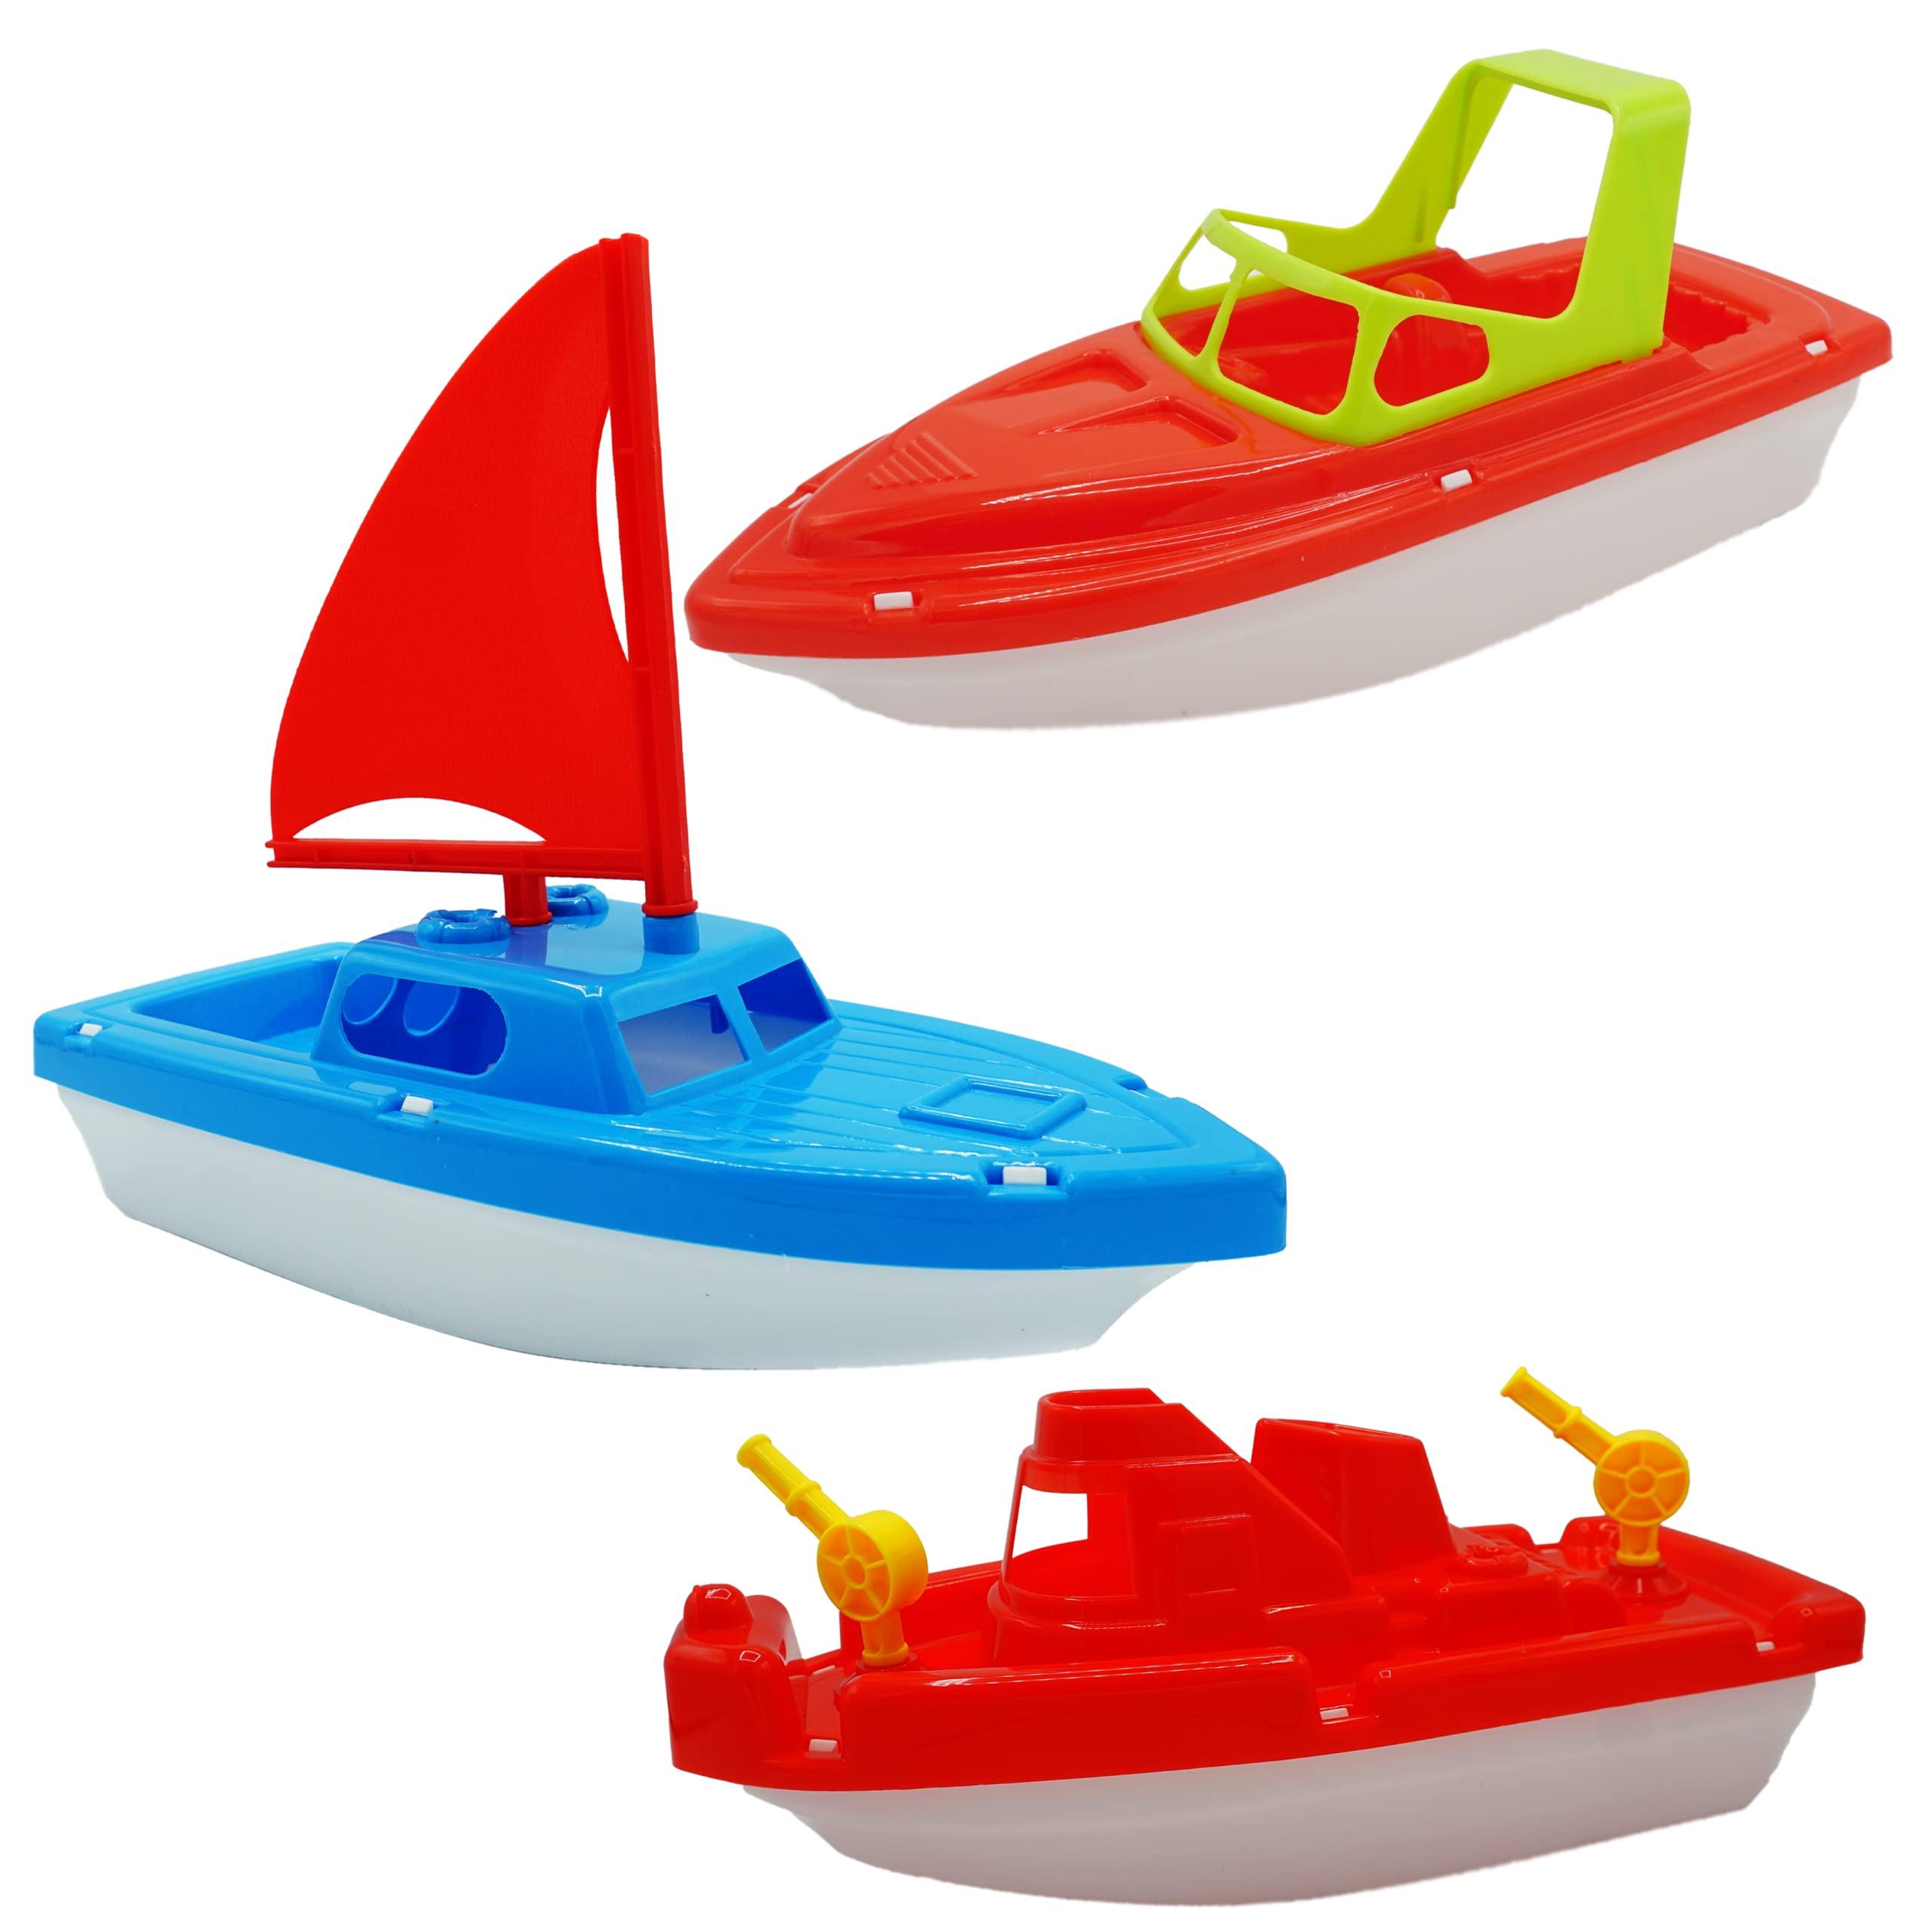 Motor Boat Toys: Safety tips for parents and children playing with motor boat toys.